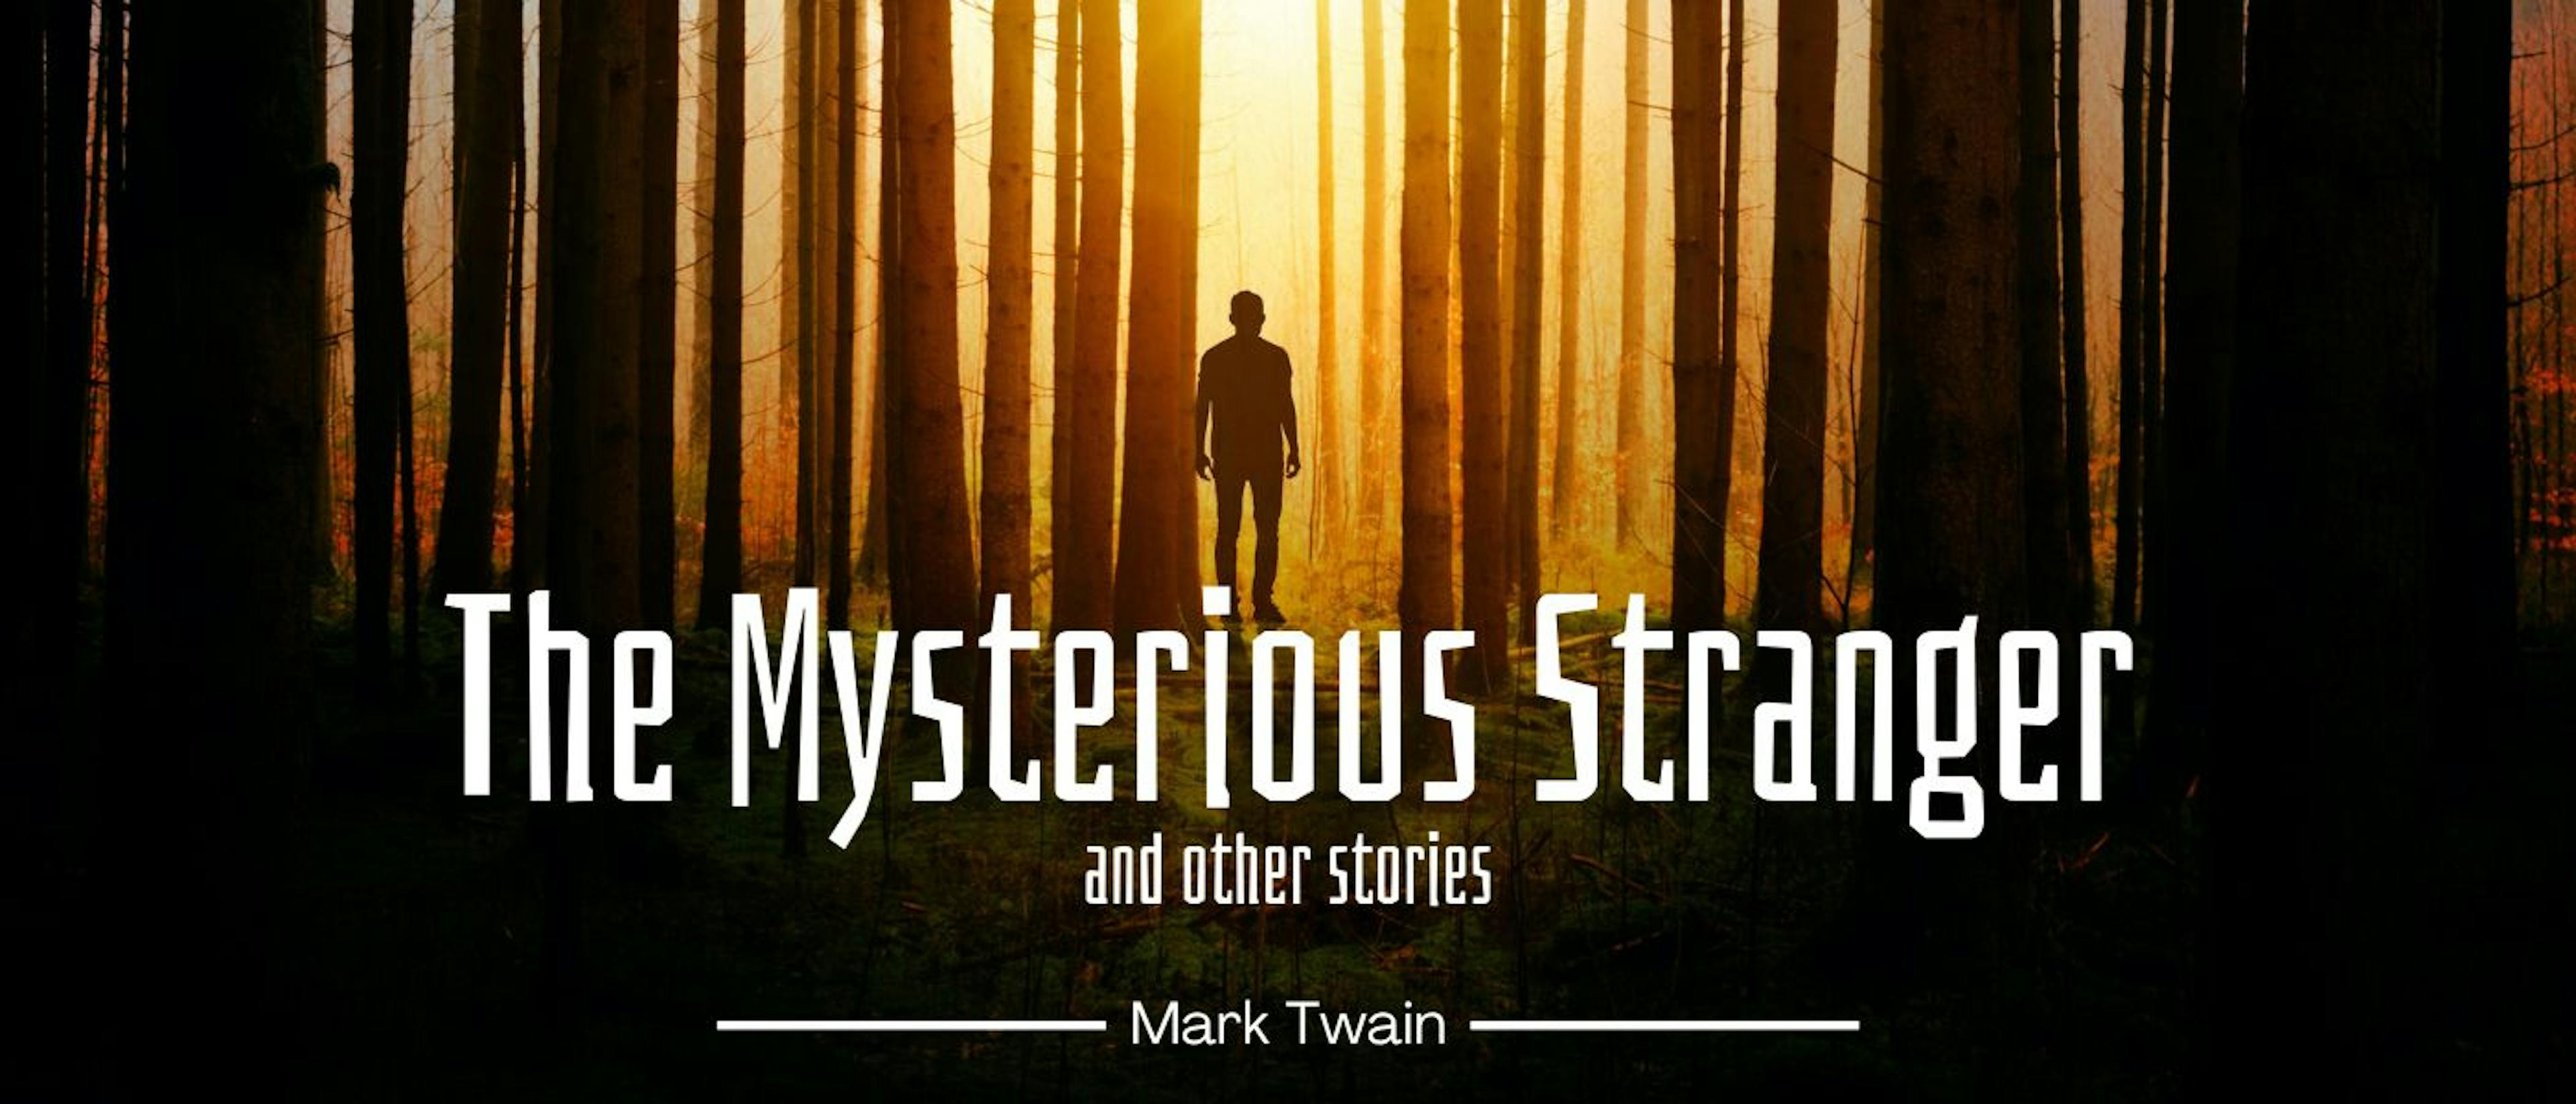 featured image - The Mysterious Stranger, and Other Stories by Mark Twain - Table of Links